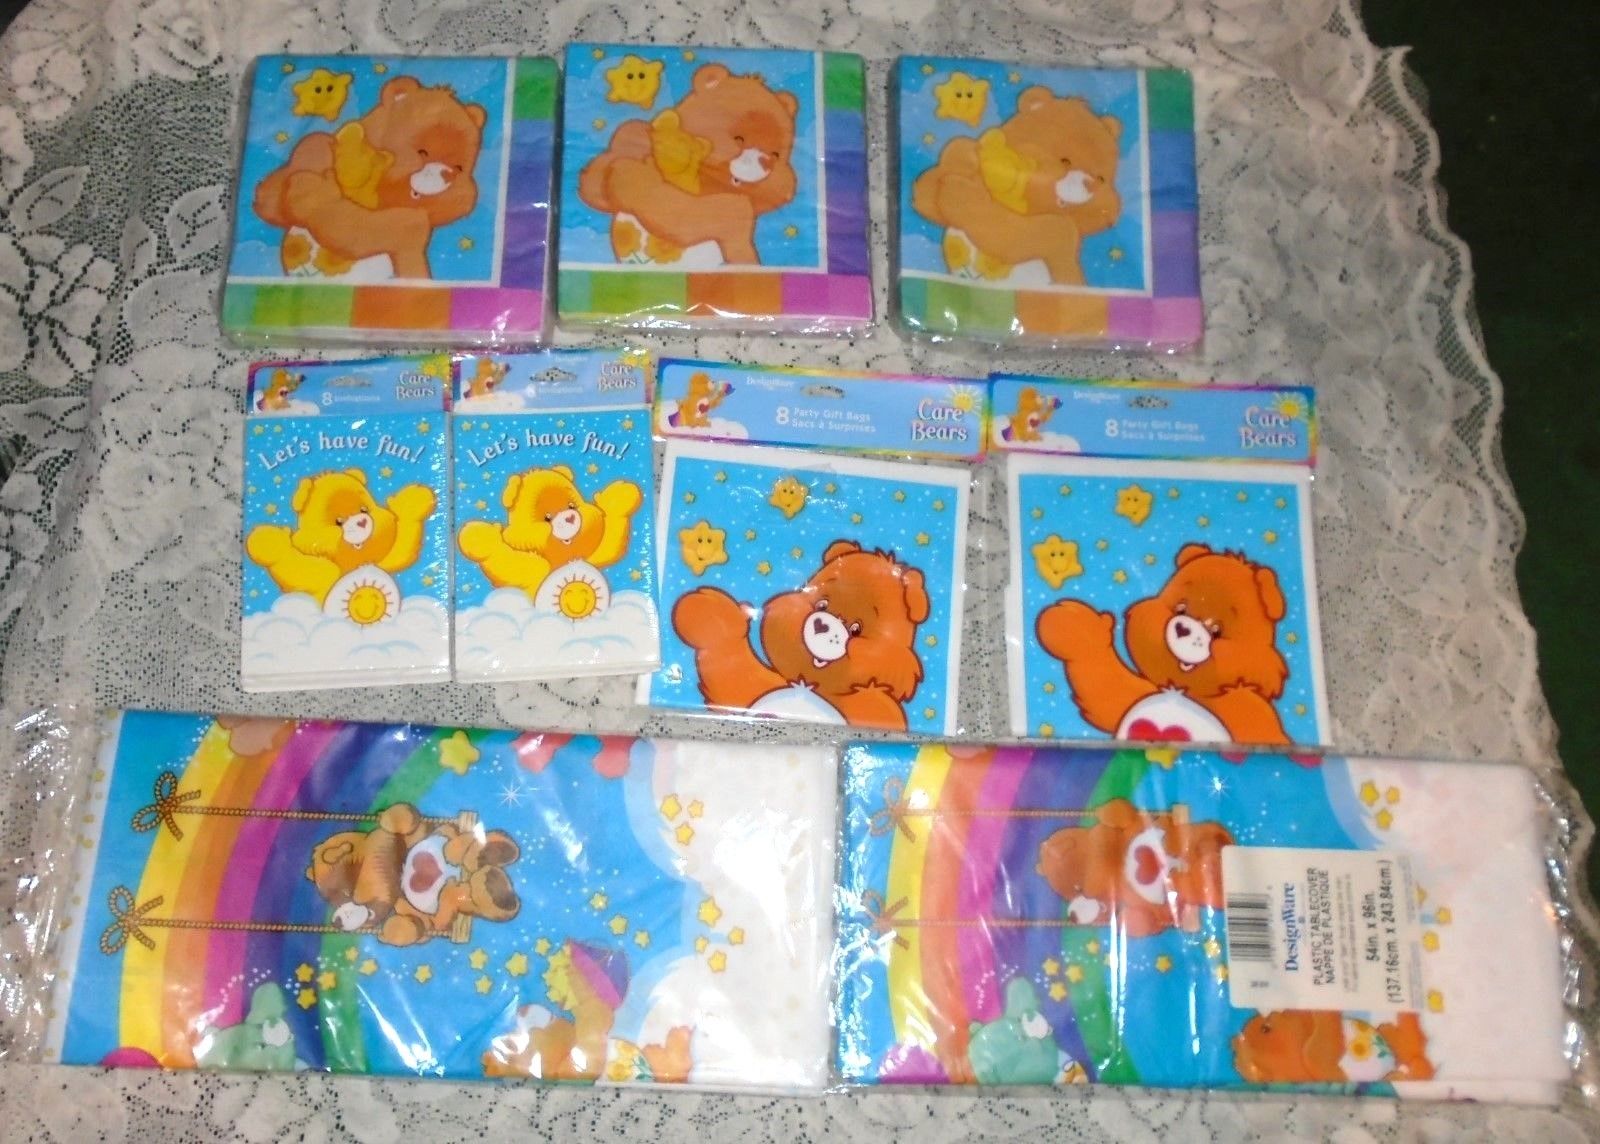 NEW LOT OF CARE BEAR PARTY FAVORS INVITATIONS NAPKINS LOOT BAGS TABLECOVERS 